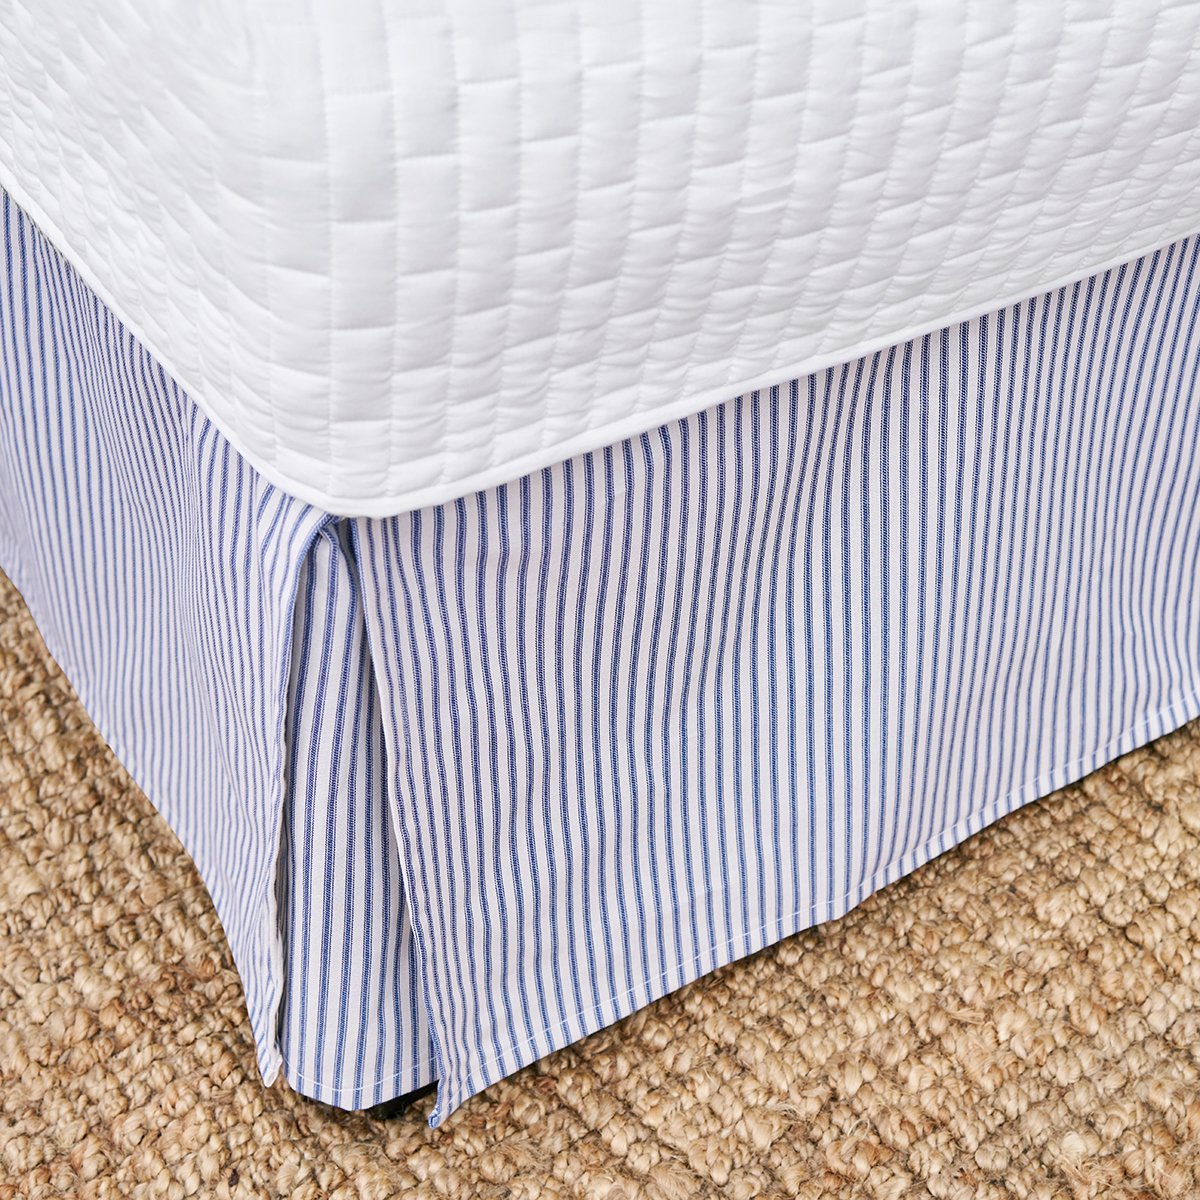 Ticking Stripe Bed Skirt | 5 Colors Available